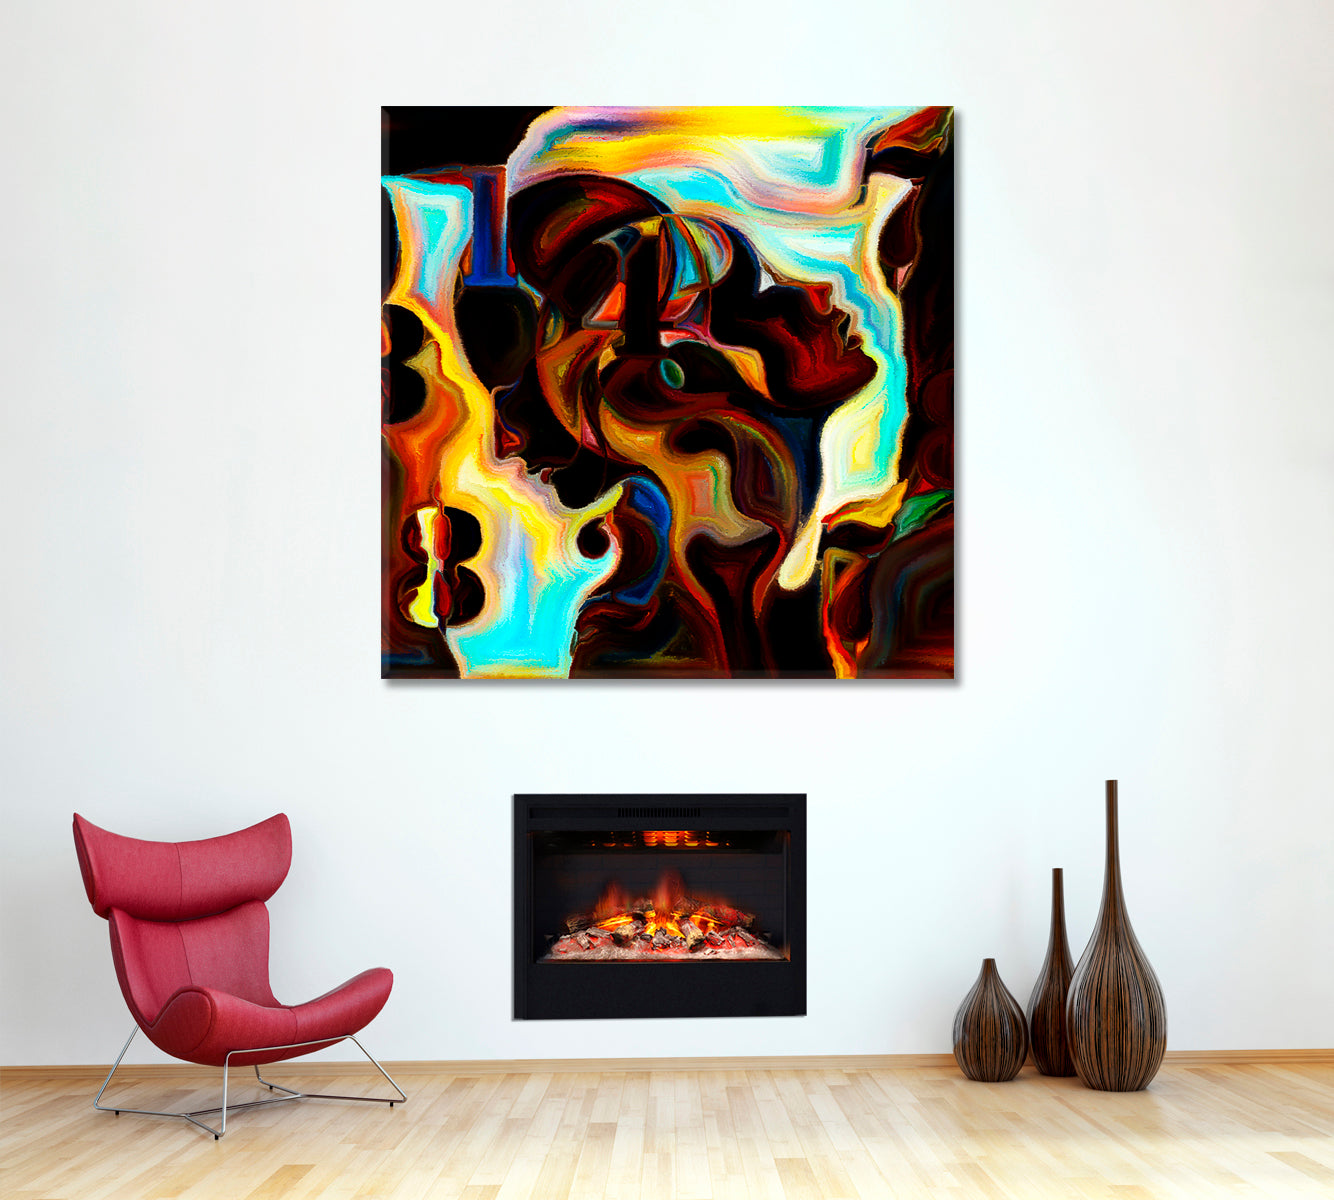 MODERN Abstract Forms Shapes Unique Design Wall Art Trendy Canvas Print | Square Panel Contemporary Art Artesty 1 Panel 12"x12" 